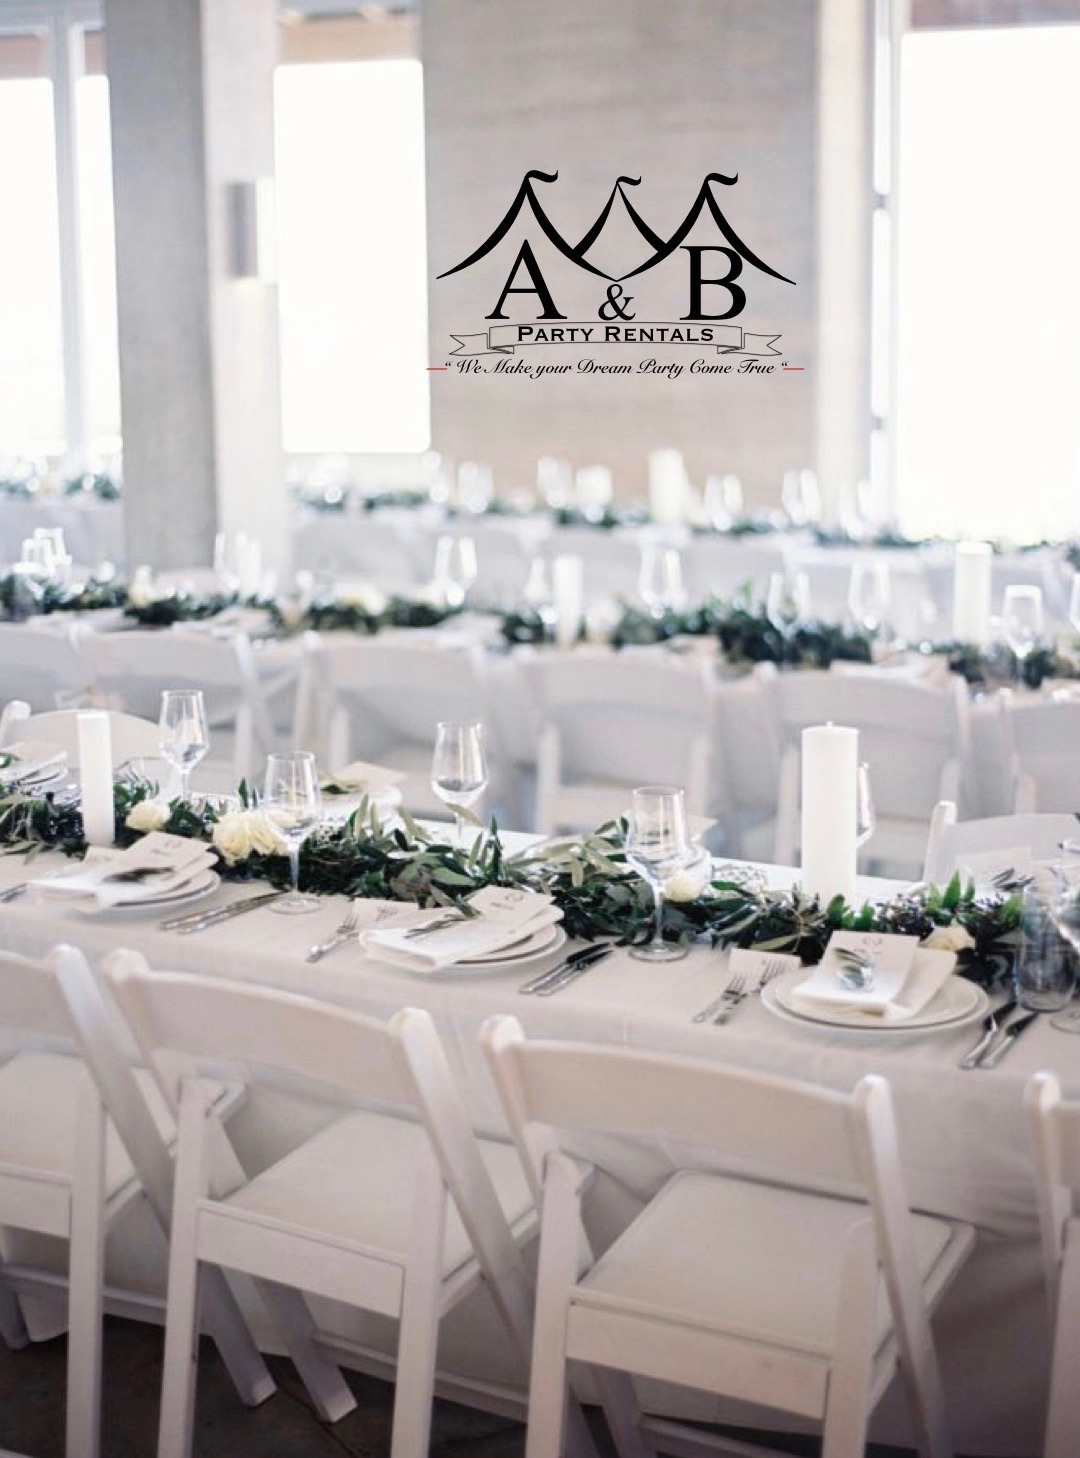 A set of elegant rectangular tables in a reception hall set up for a wedding or formal event. The image displays beautifully arranged tables suitable for weddings or formal events, part of the offerings by A&B Party Rentals in Salisbury, MD.